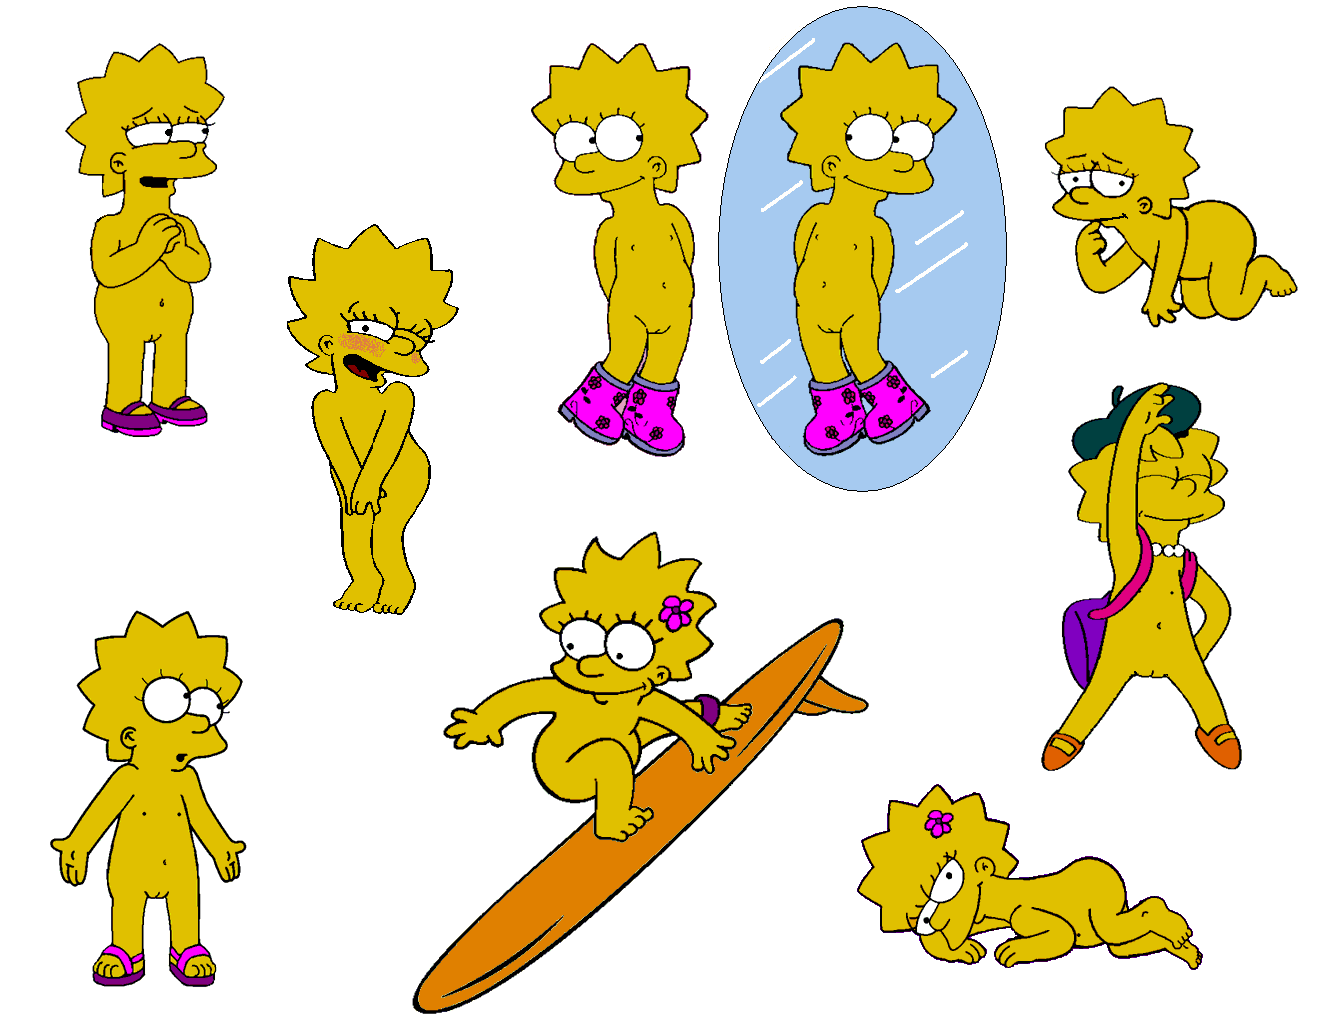 Showing images for lisa simpson gif caption XXX.